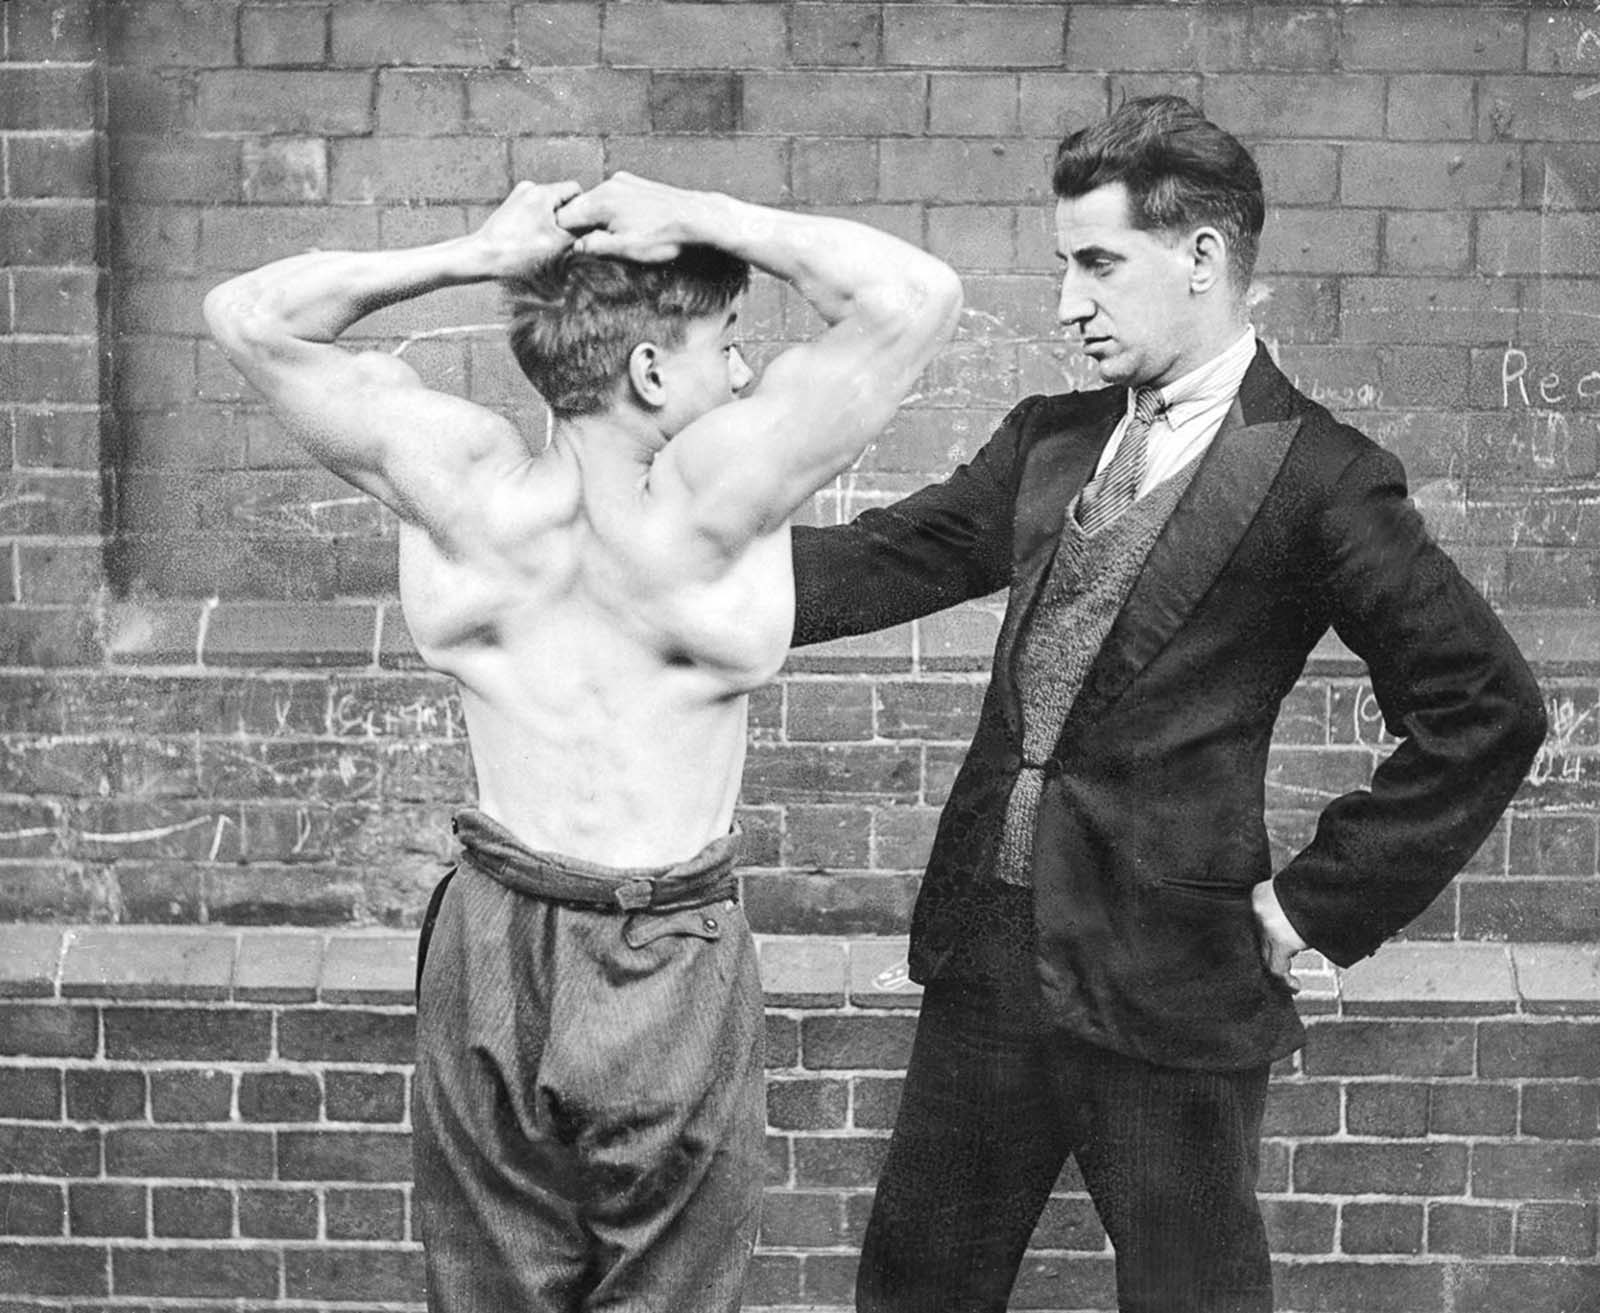 Lewis Clark, “the strong boy,” shows off his back muscles, 1930.